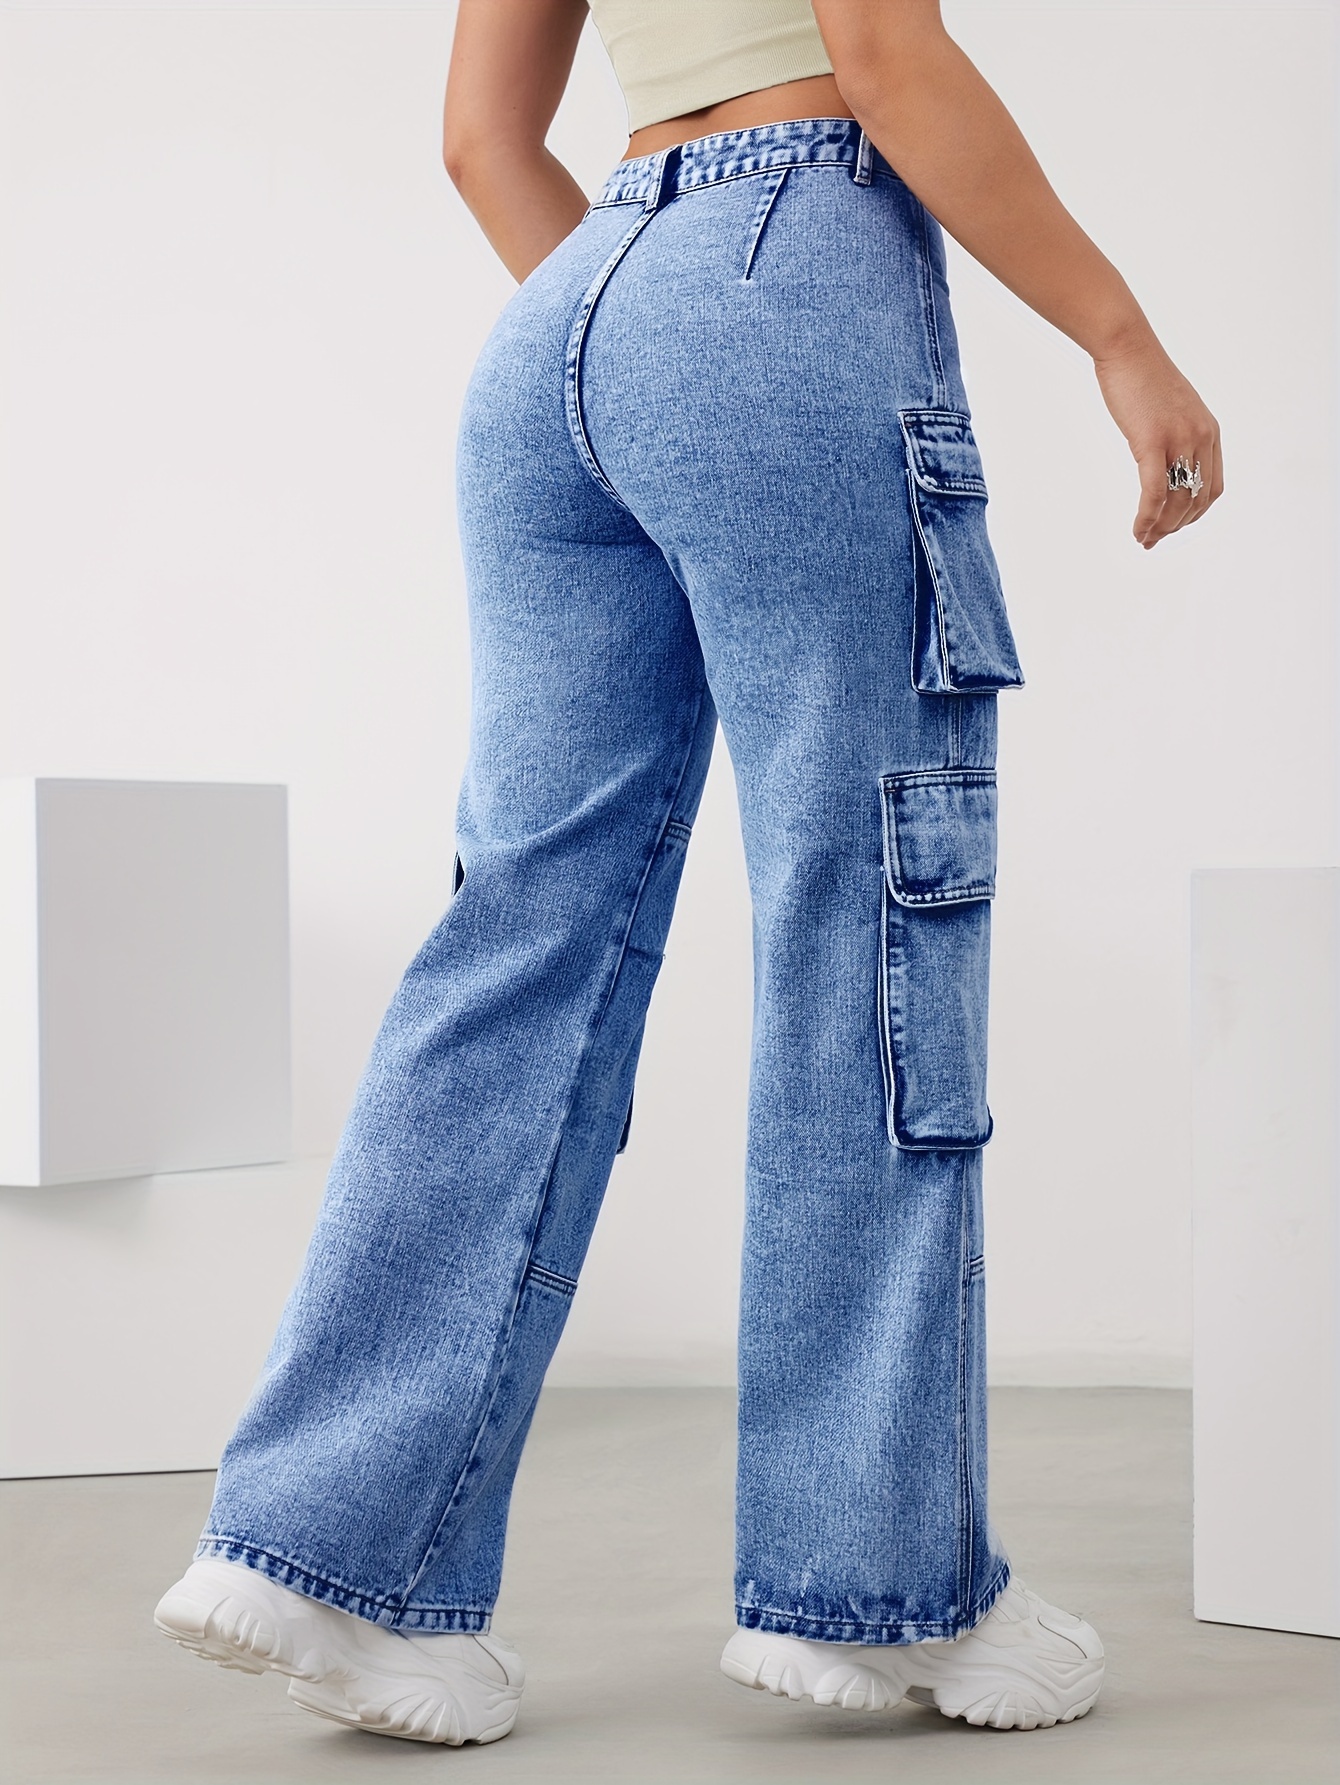 Suncolour Womens High Waisted Flare Jeans Wide Leg Denim Cargo Pants with  Multi-Pockets Streetwear at  Women's Jeans store